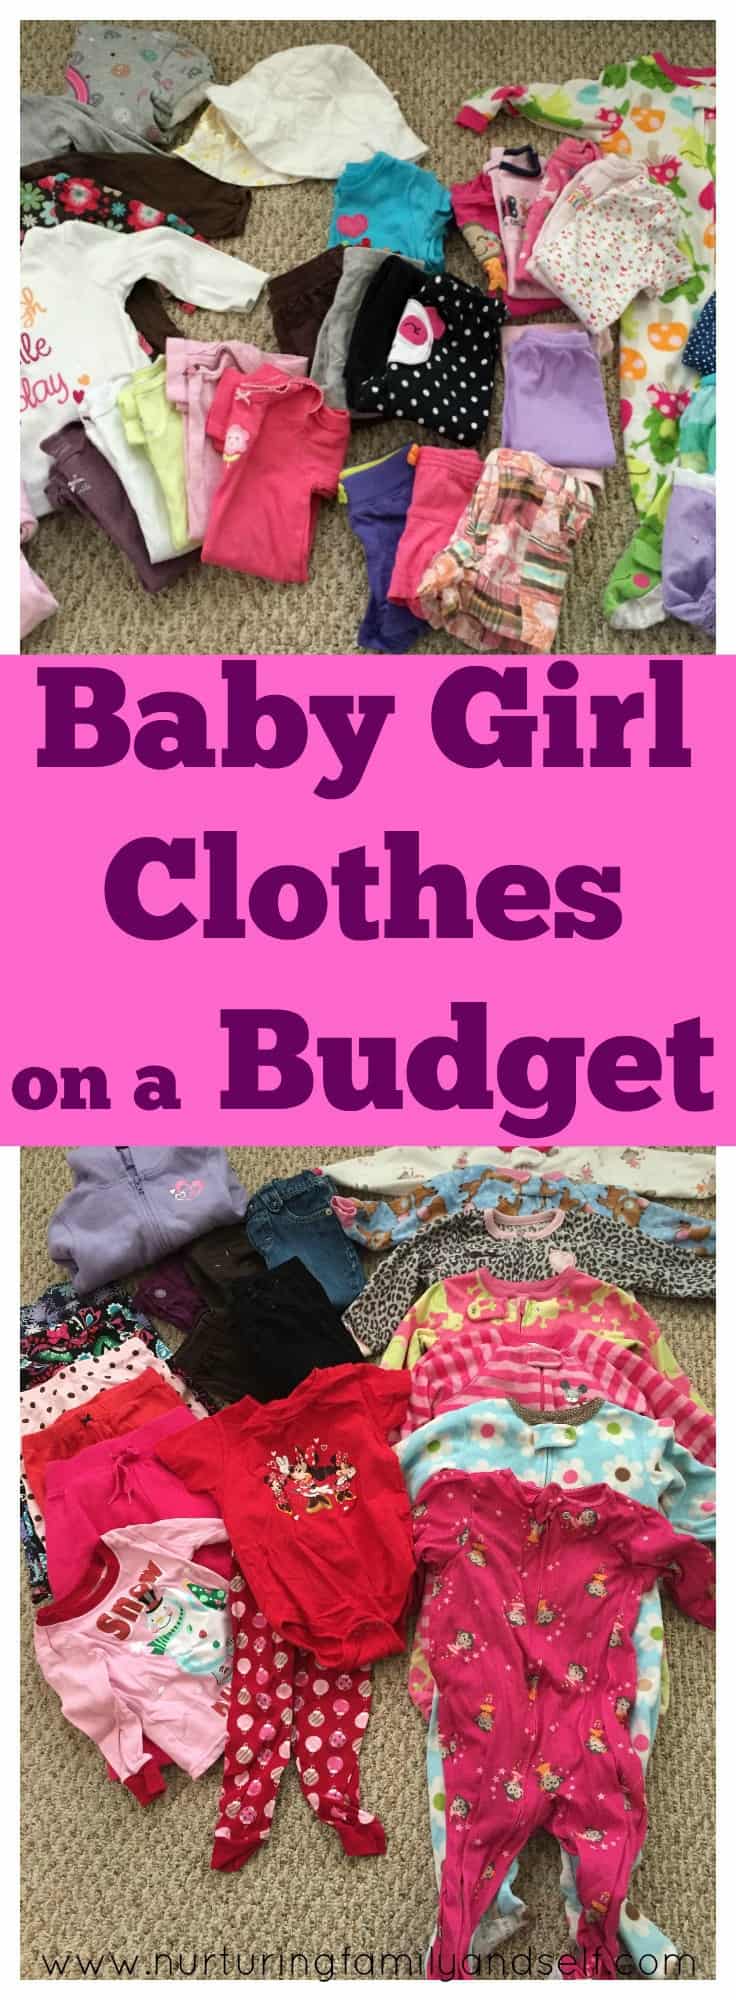 Baby Girl Clothes on a Budget Pinnable Image